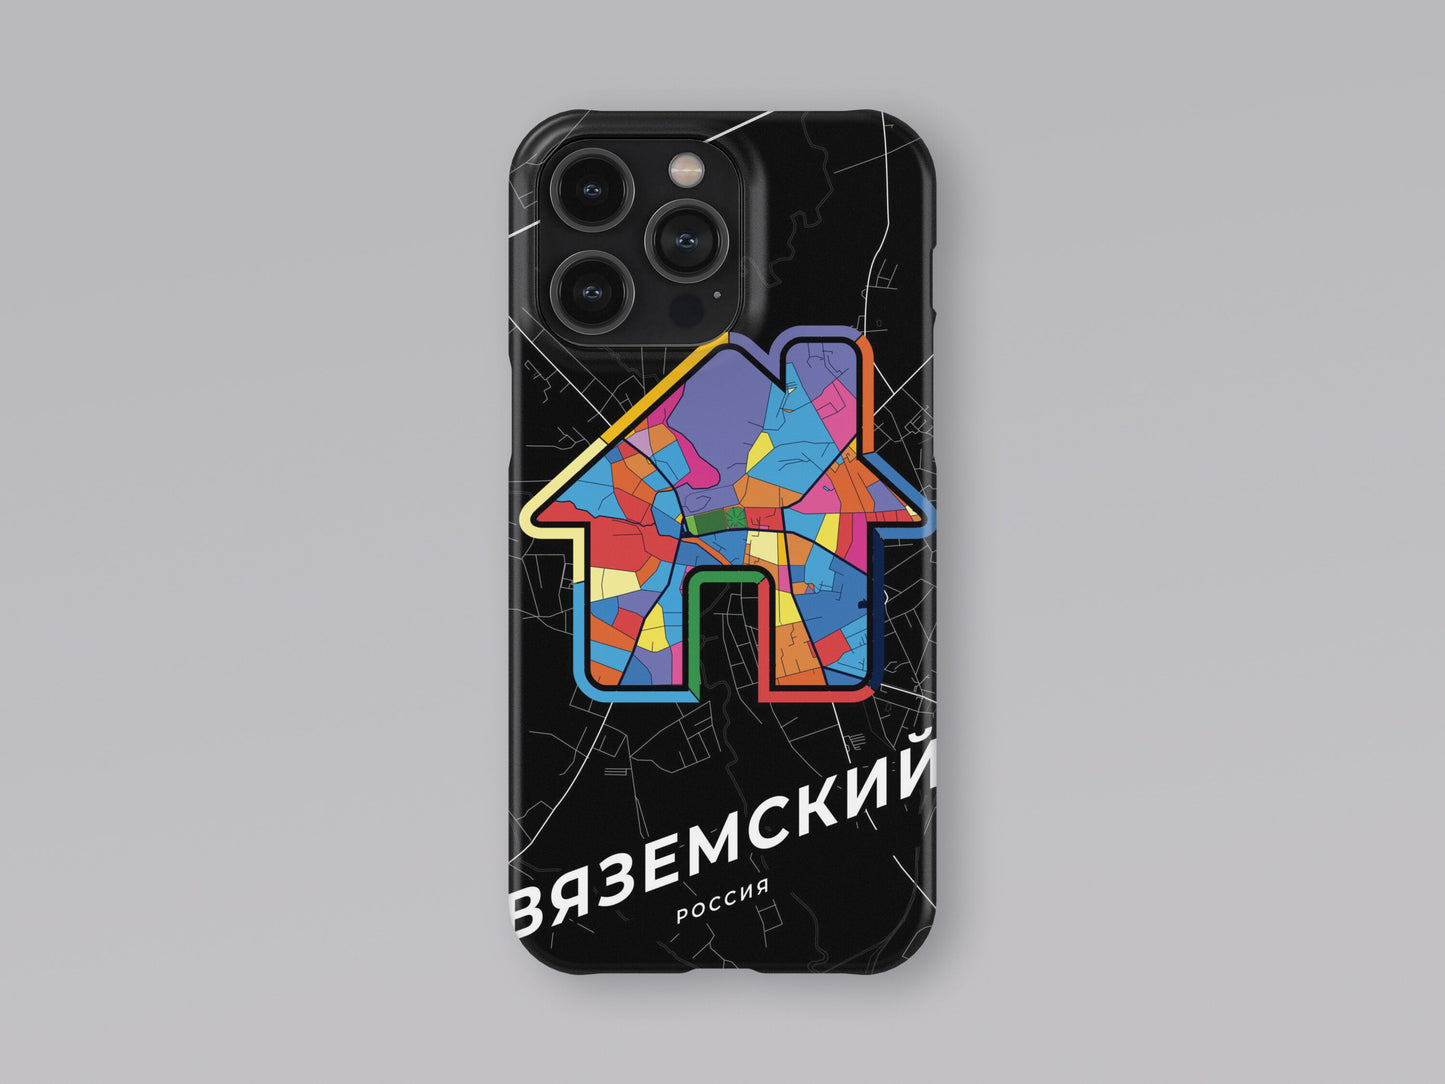 Vyazma Russia slim phone case with colorful icon 3